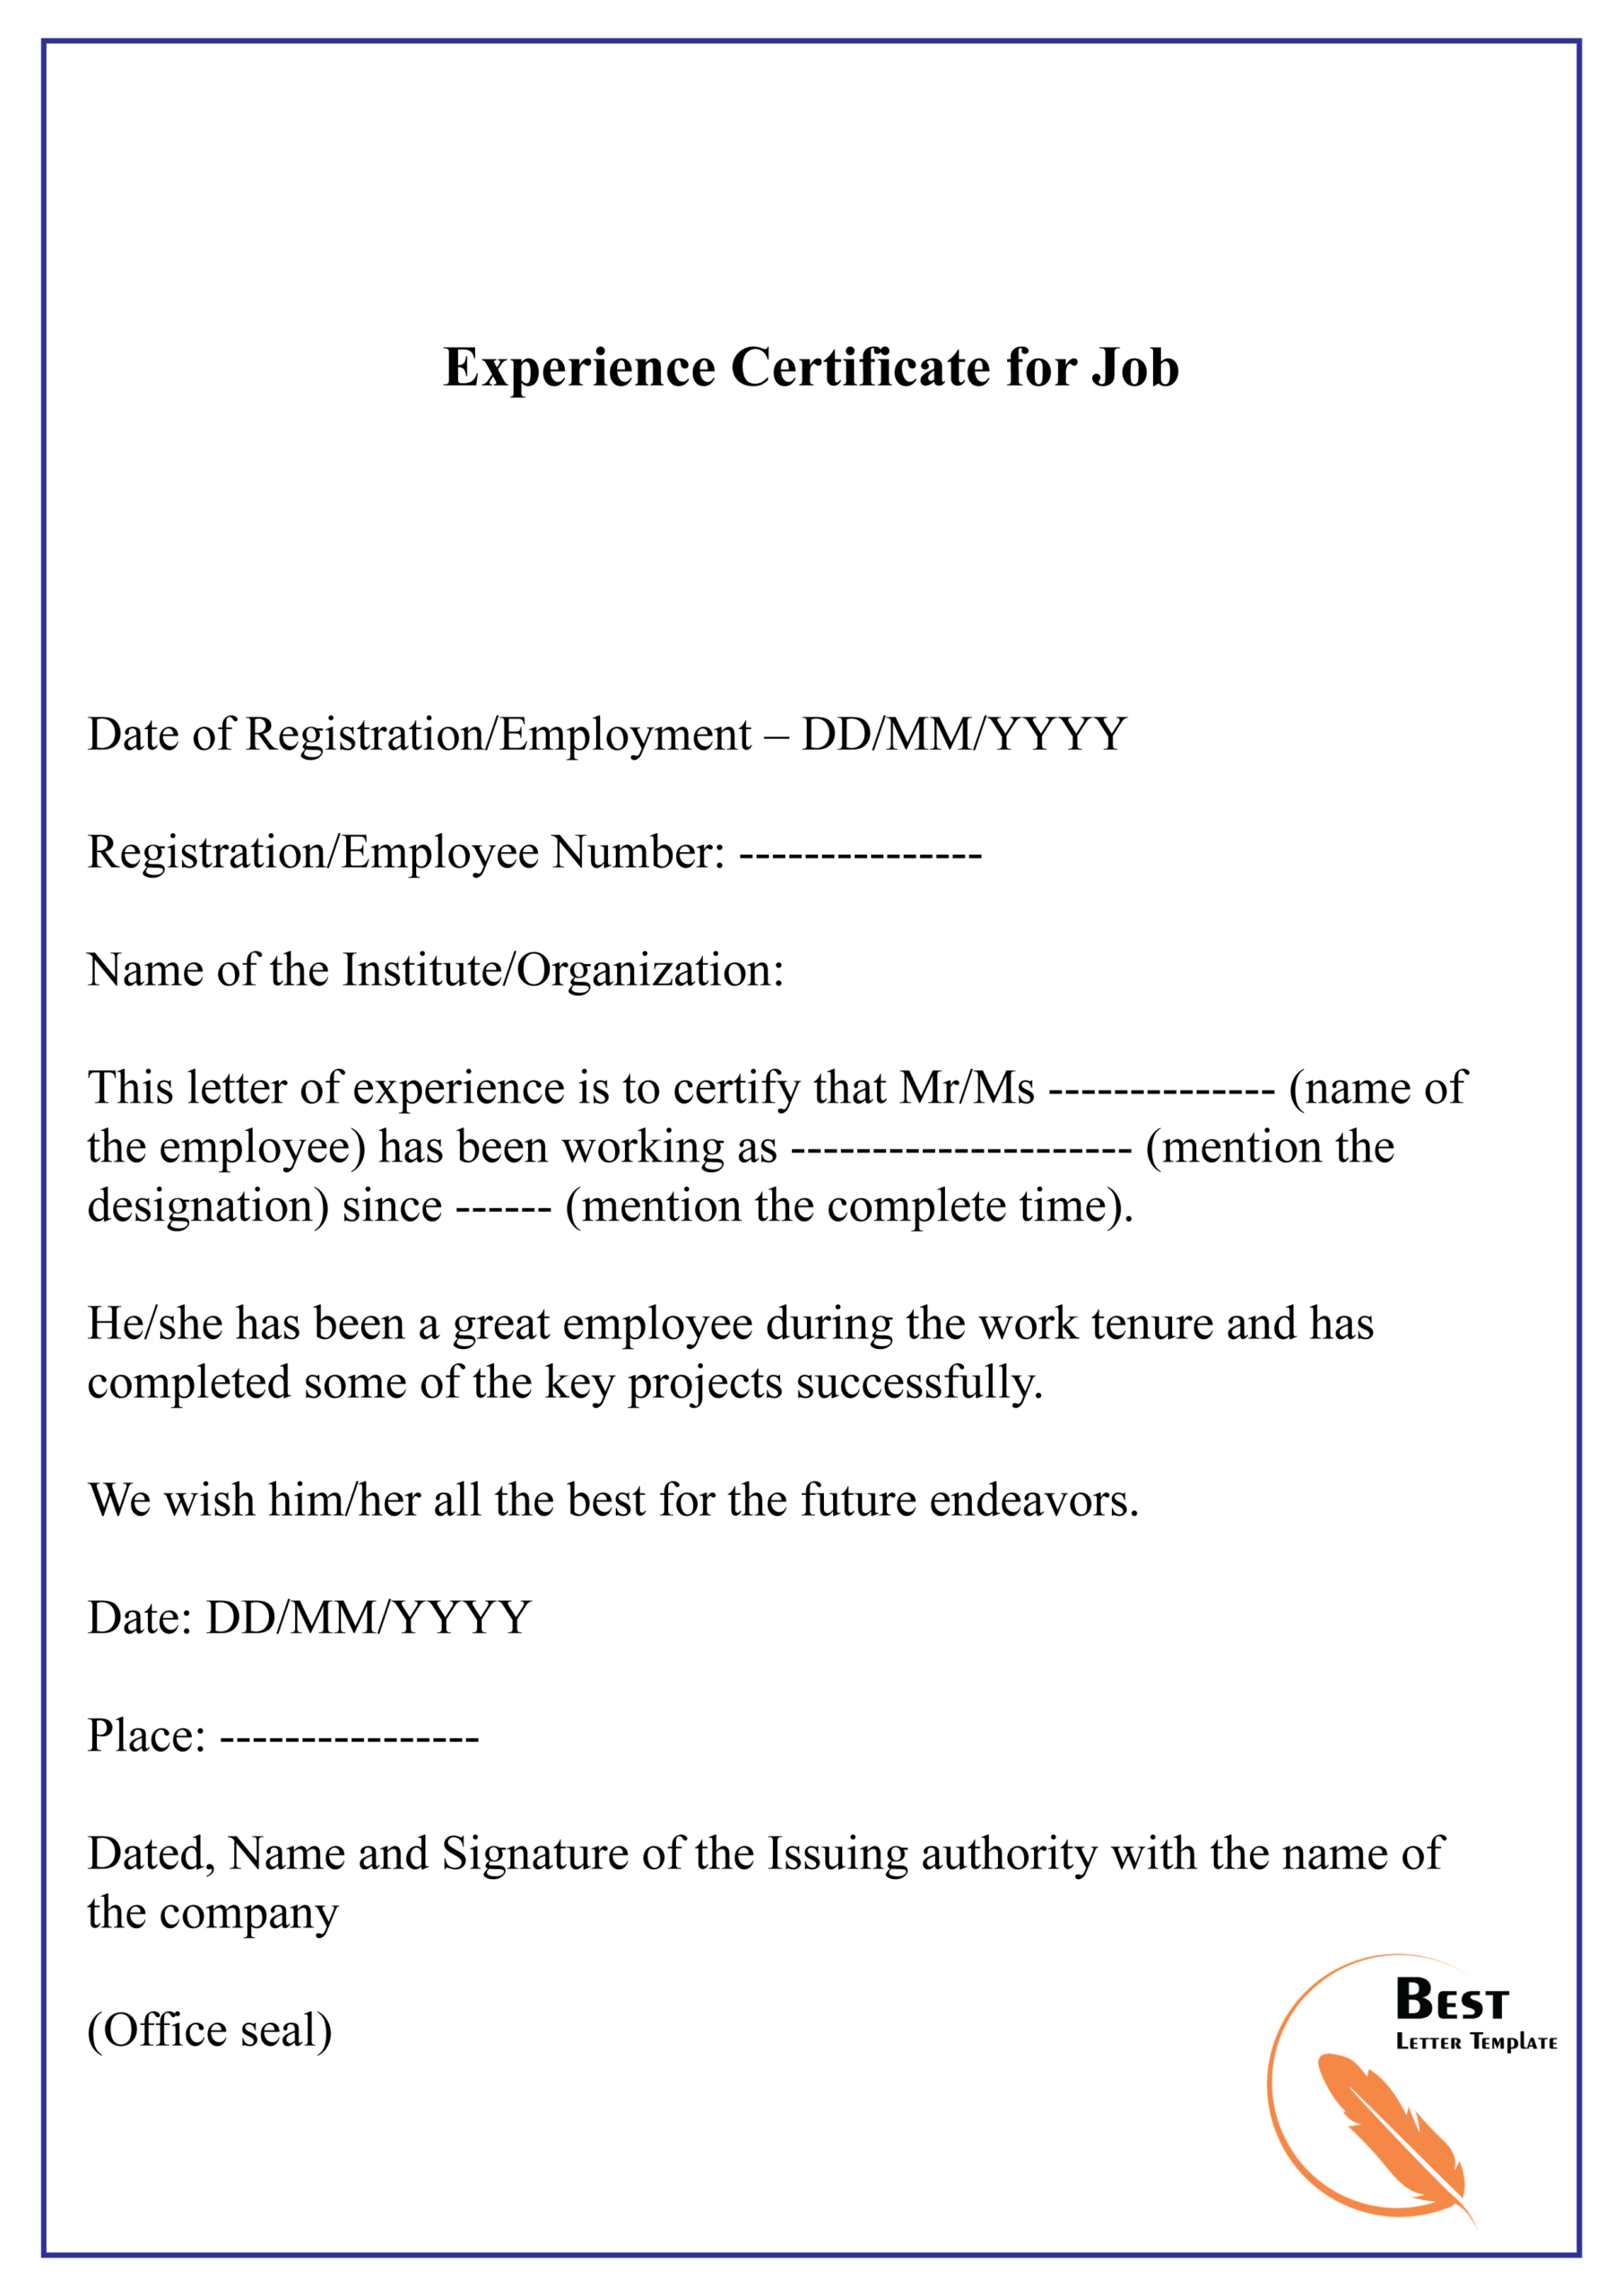 Experience Certificate For Job 01 | Best Letter Template Intended For Good Job Certificate Template